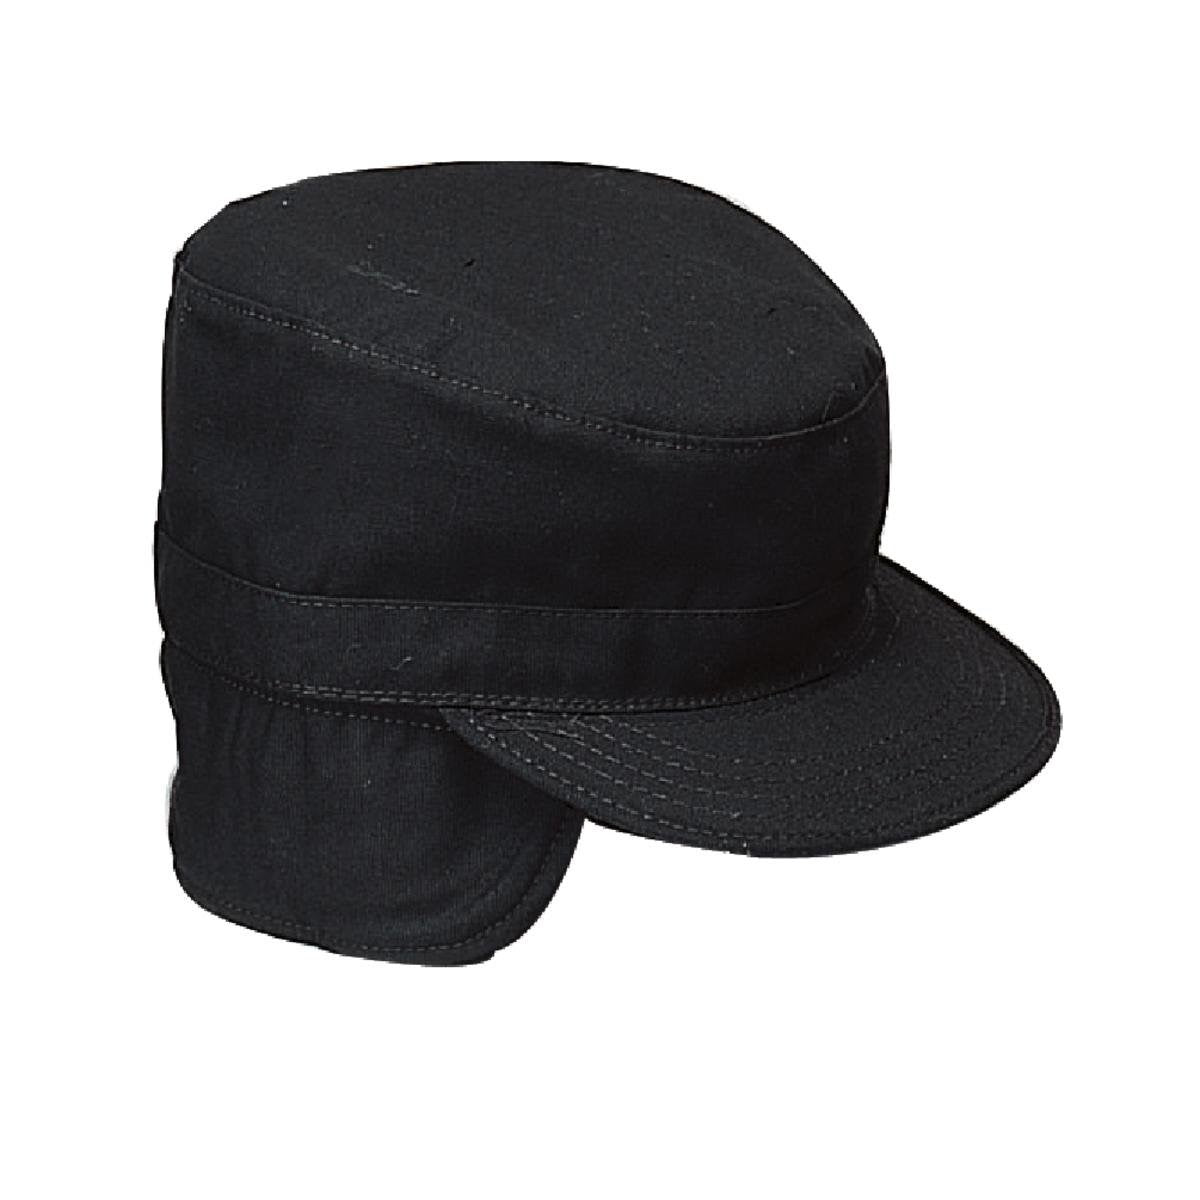 GI Style Ranger Cap with Ear Flaps – McGuire Army Navy